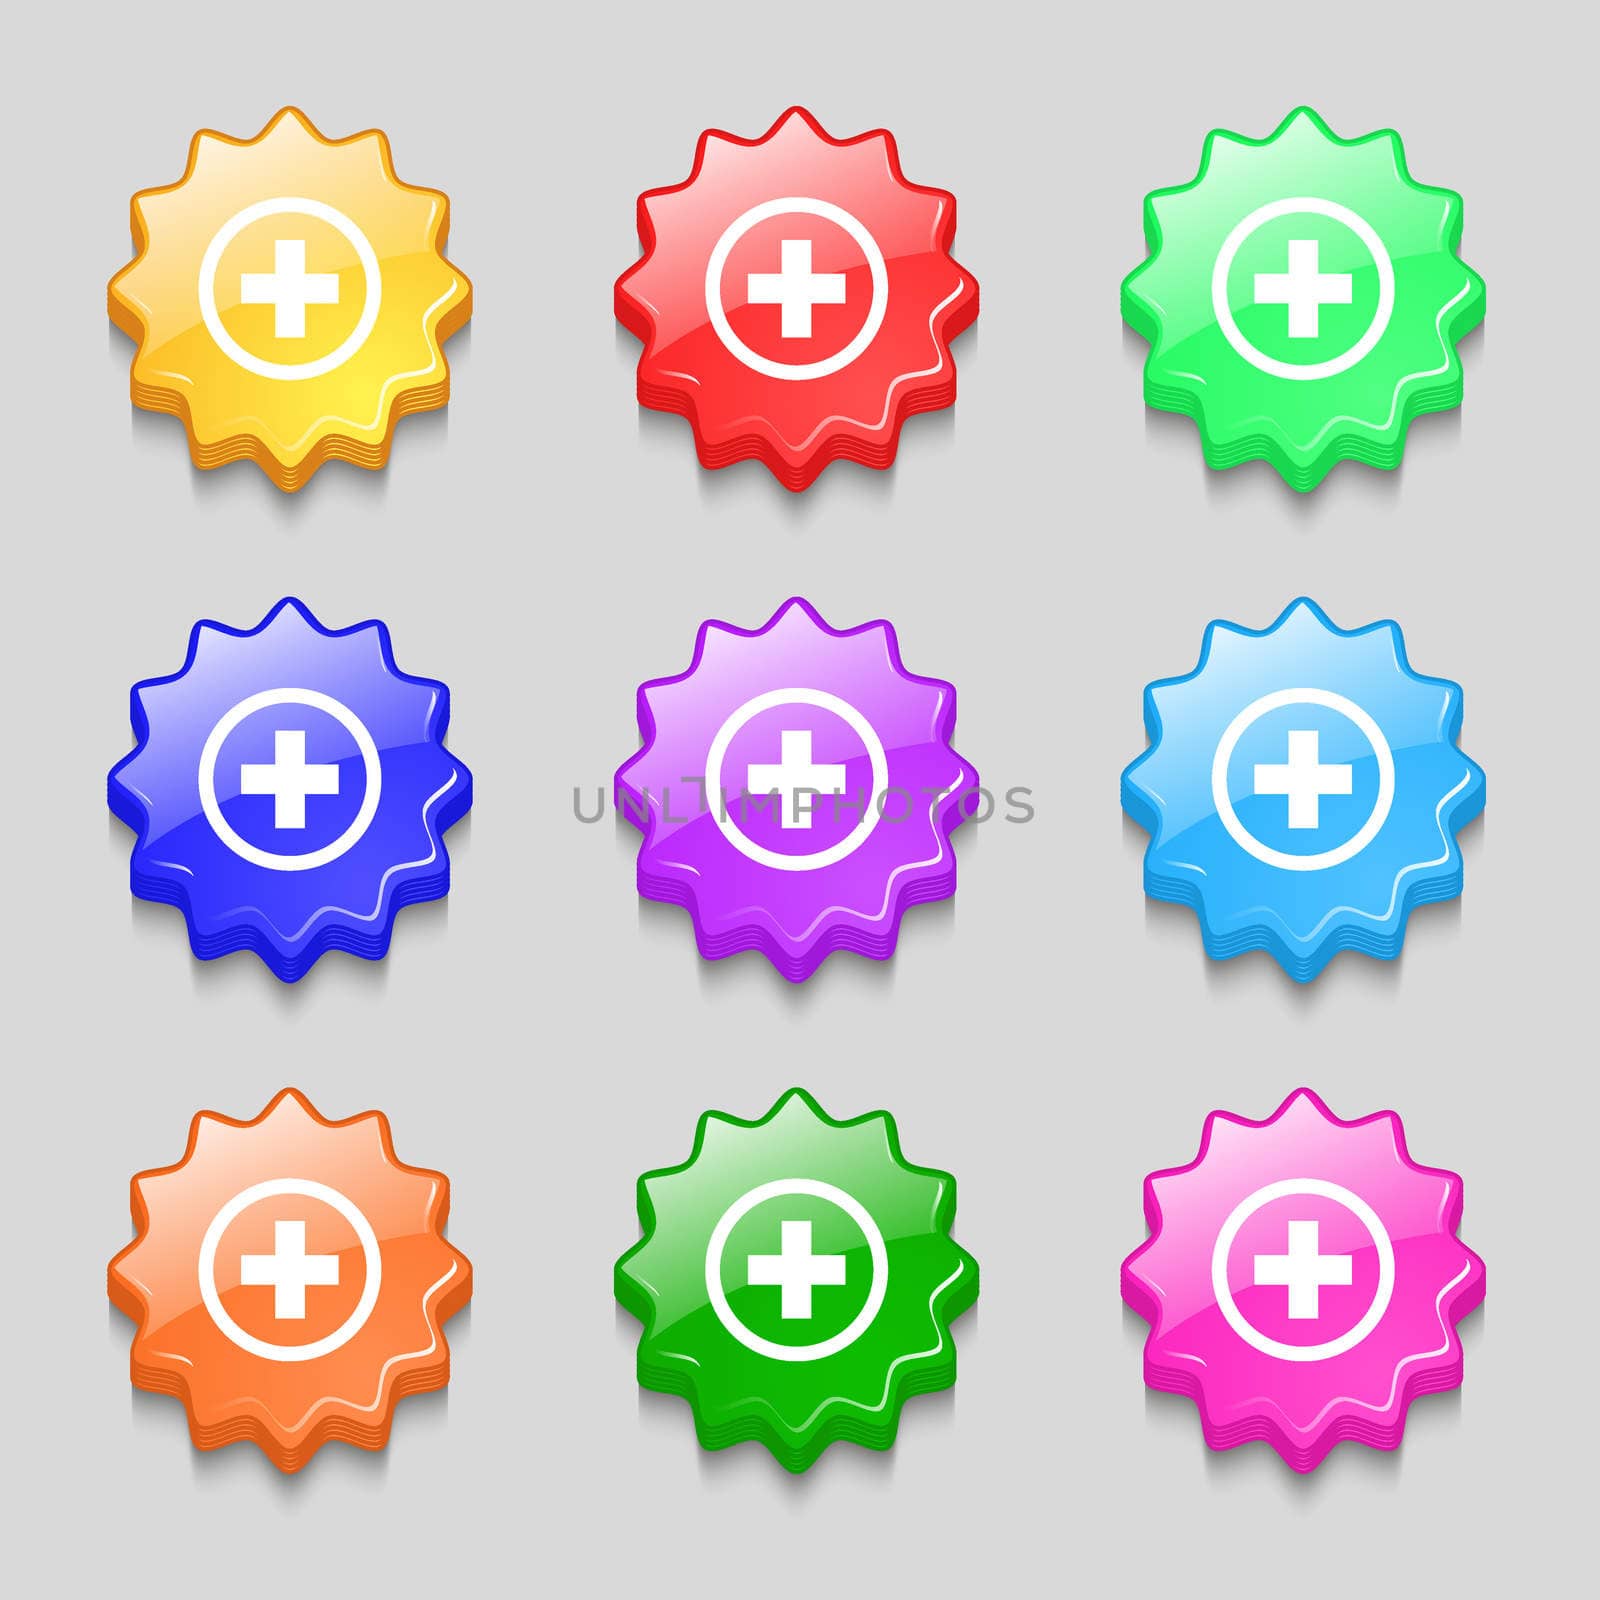 Plus sign icon. Positive symbol. Zoom in. Symbols on nine wavy colourful buttons. illustration